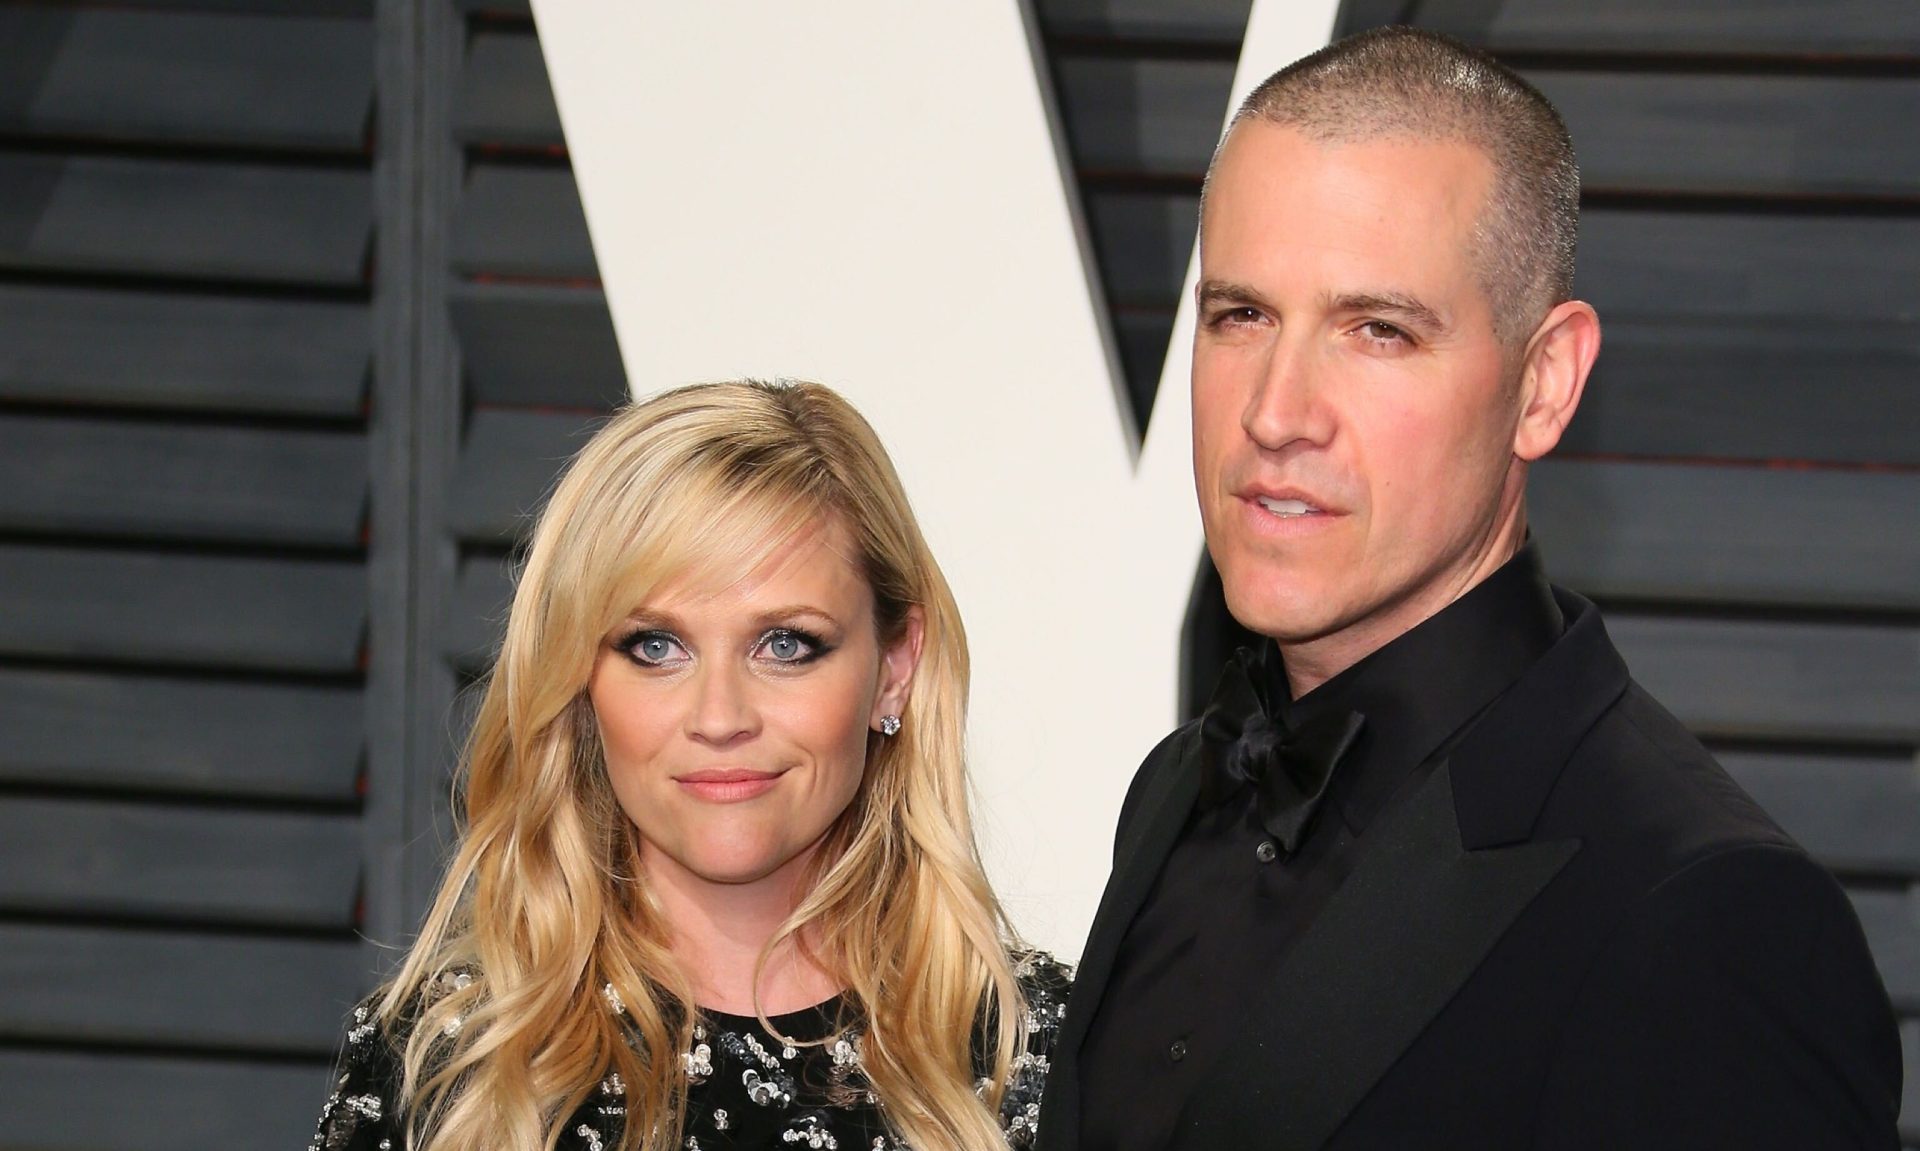 Reese Witherspoon And Jim Toth Announce Divorce Days Before 12-Year Anniversary